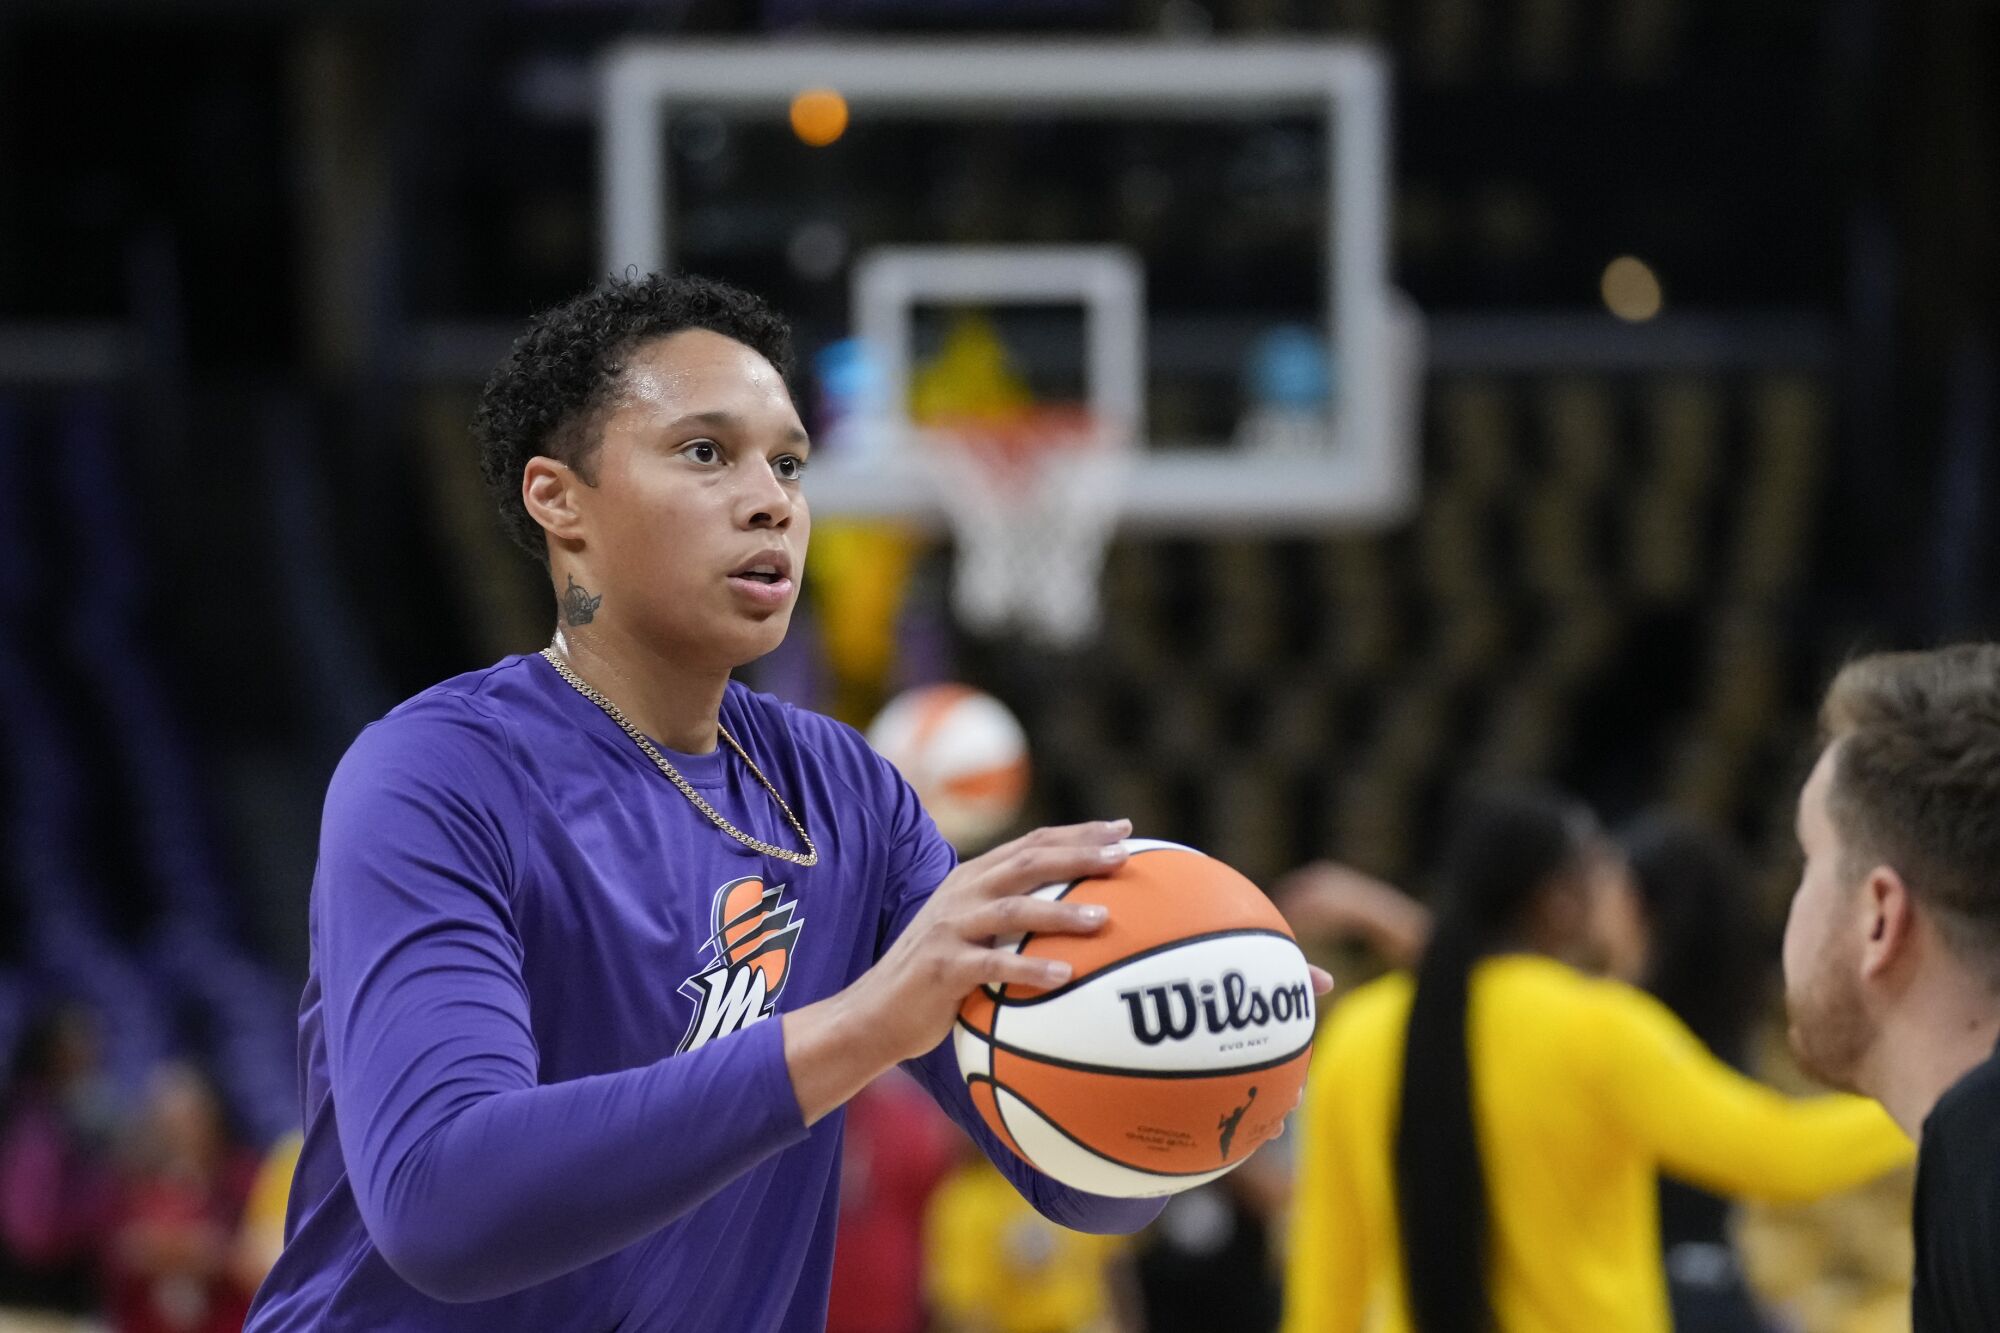 Phoenix Mercury center Brittney Griner prepares to shoot the ball while warming up before facing the Sparks